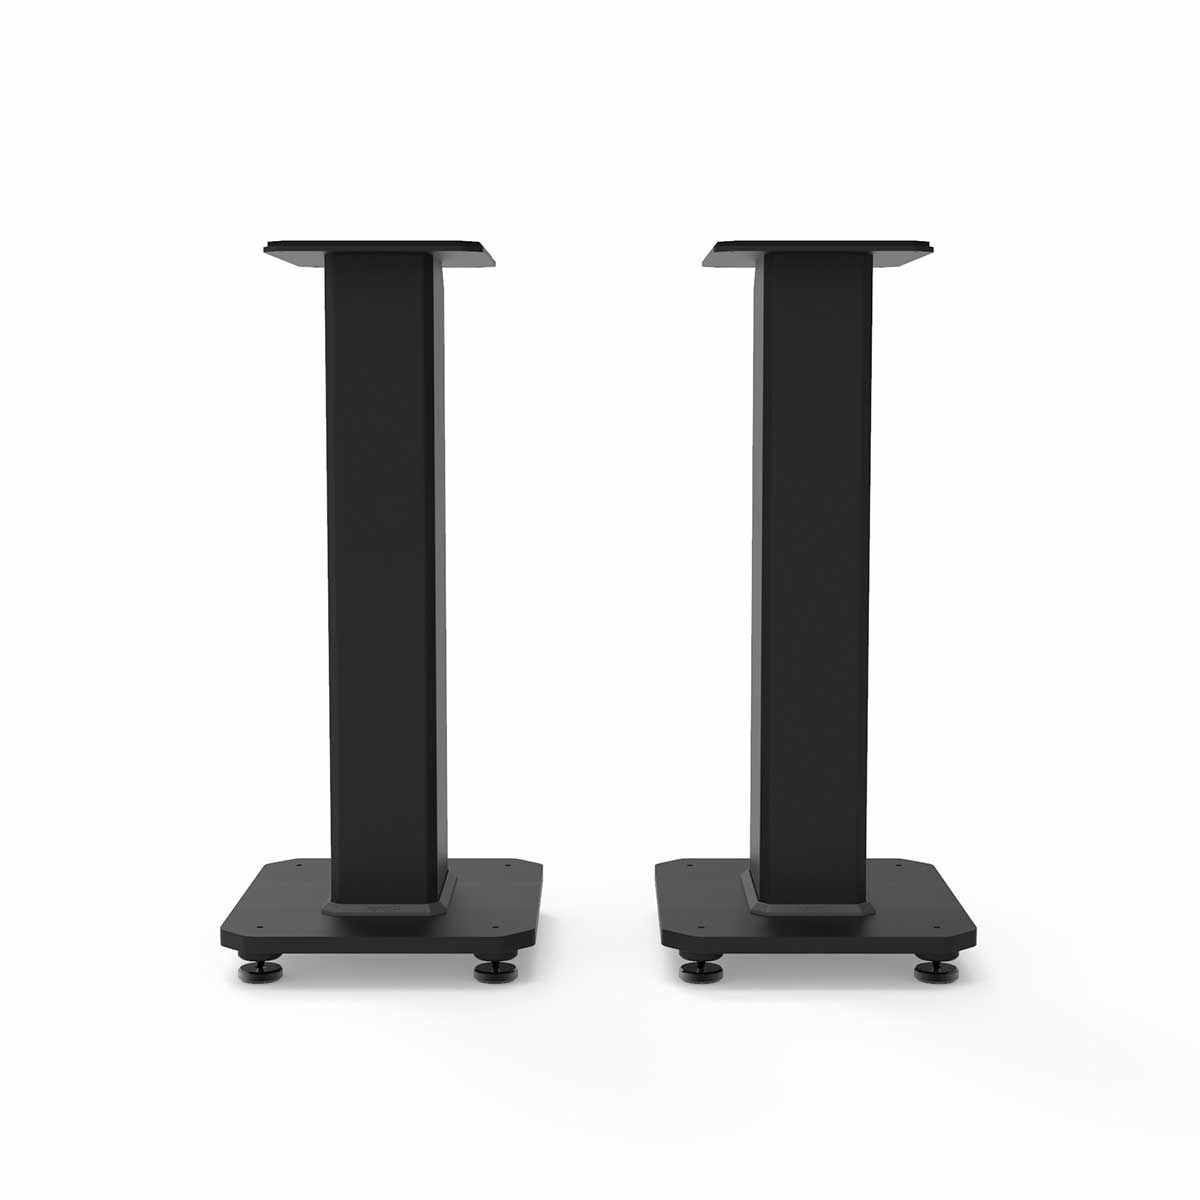 Kanto SX Speaker Stands, Black, set of two, front view